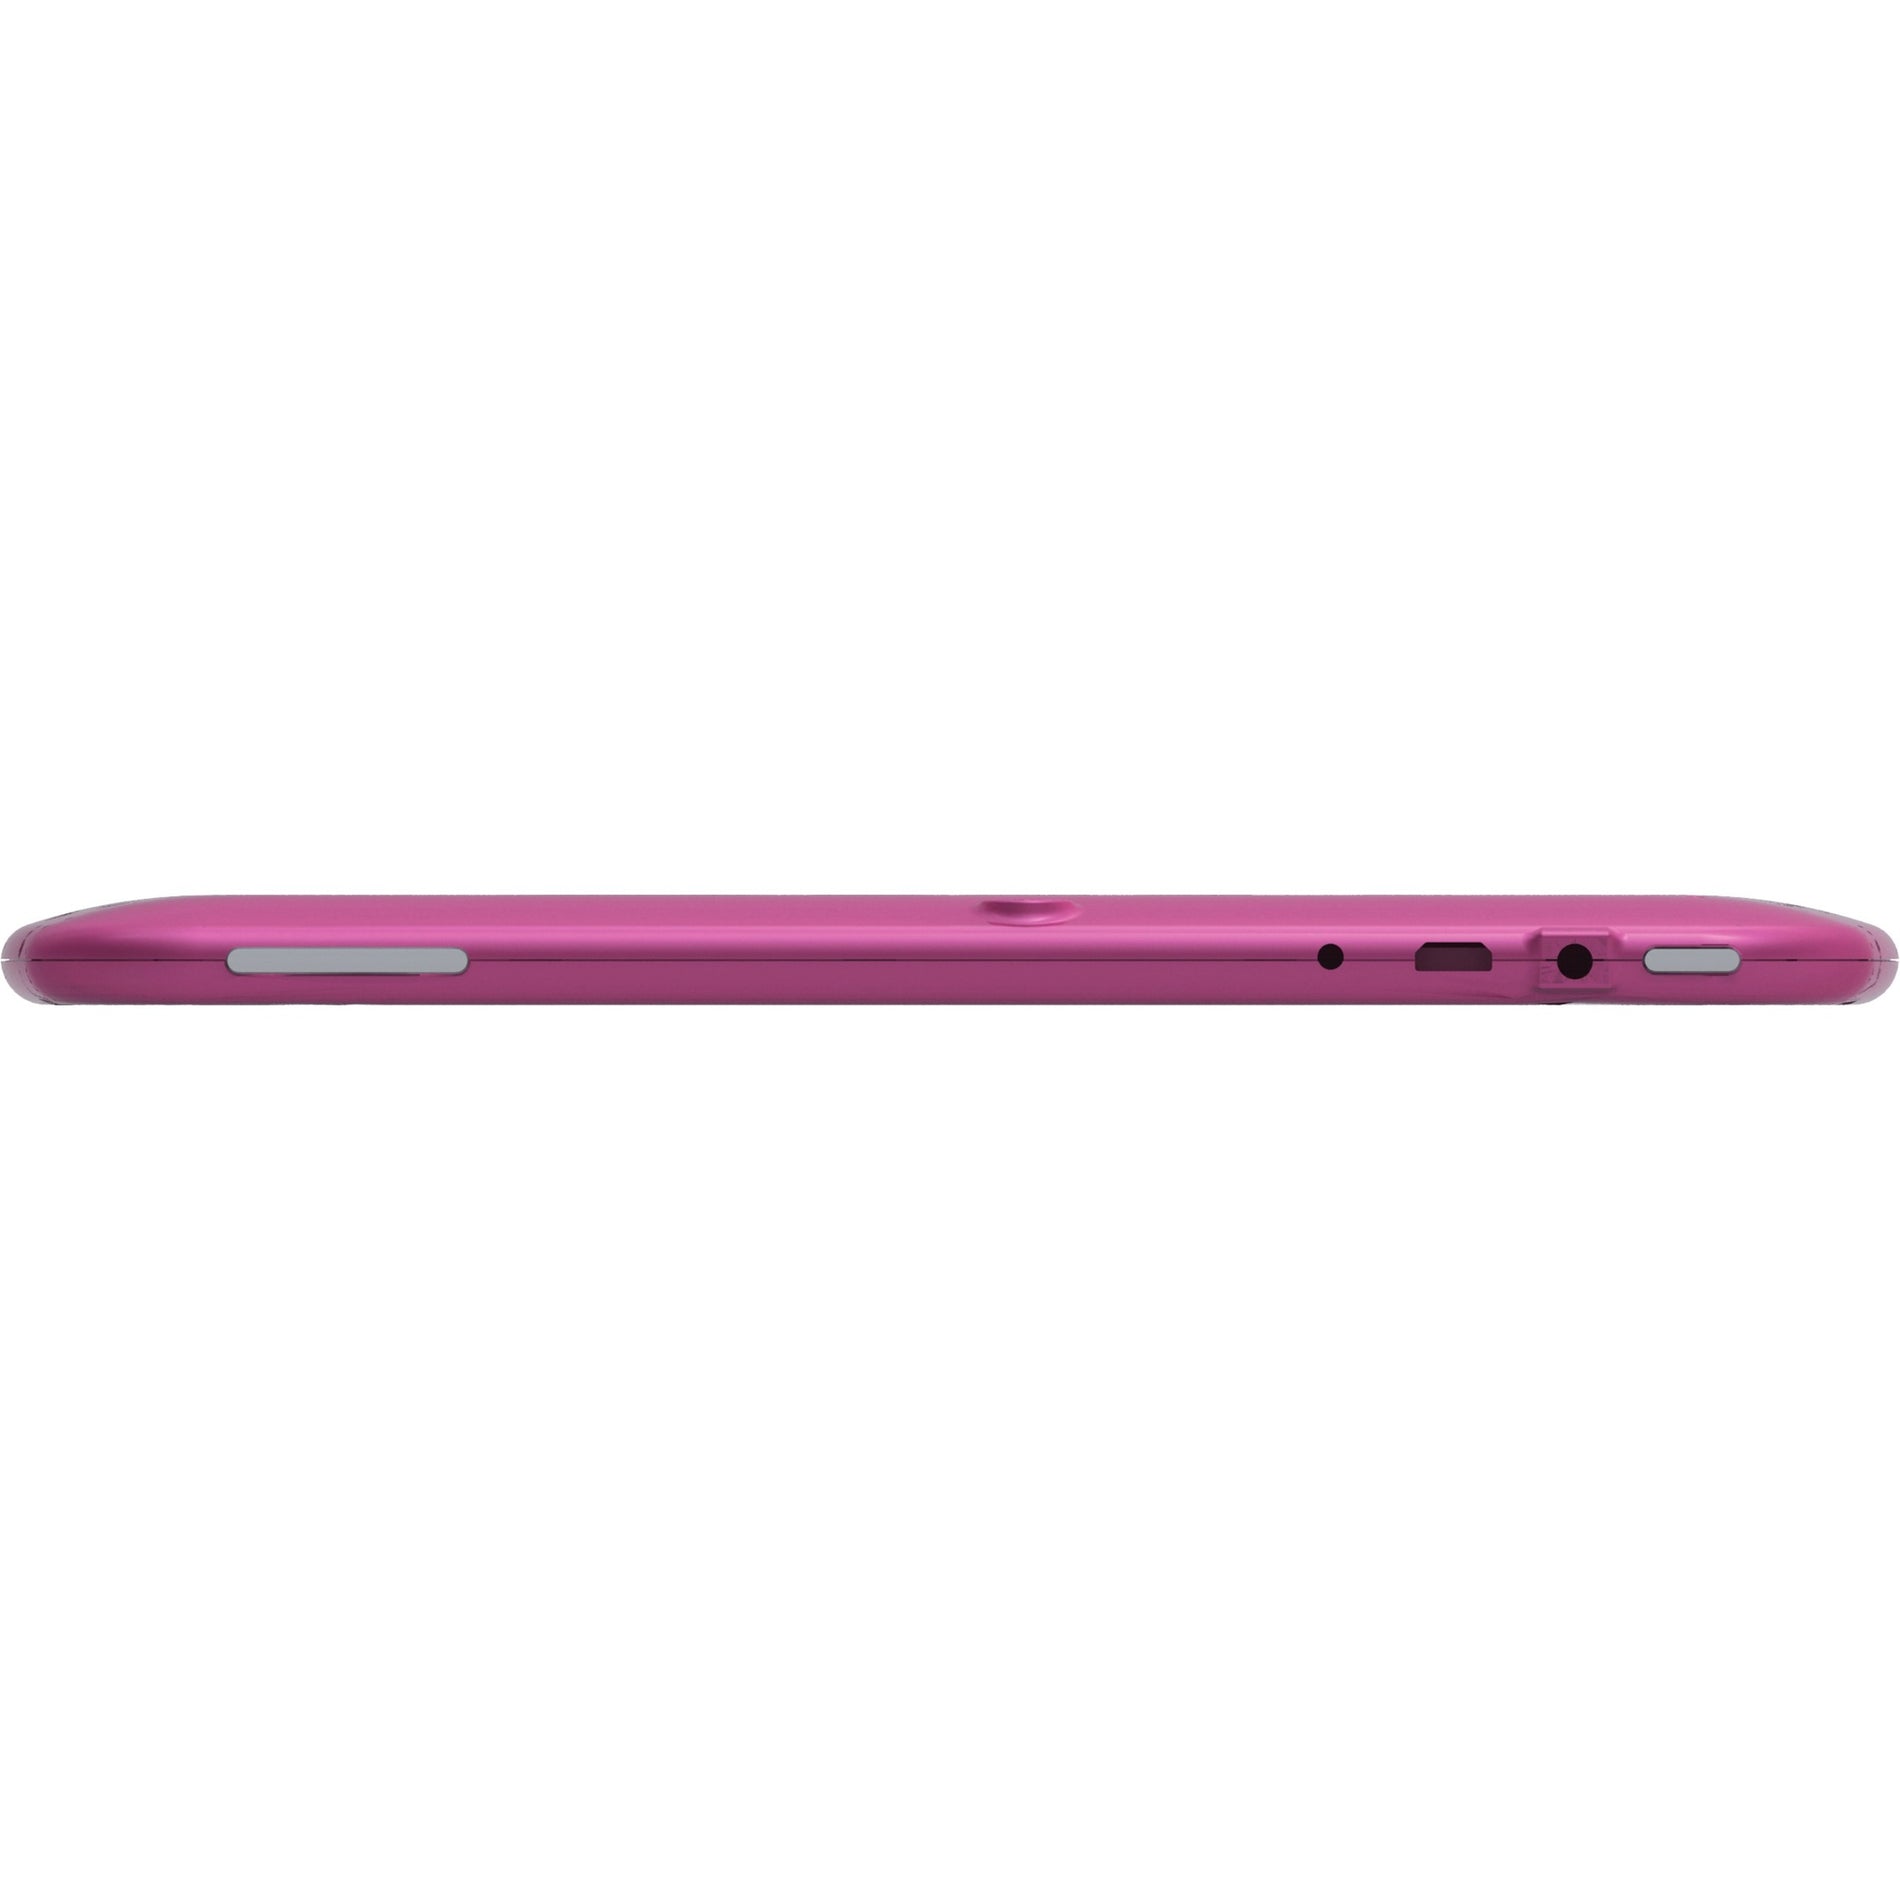 Supersonic Kids Tablet - Pink [Discontinued]